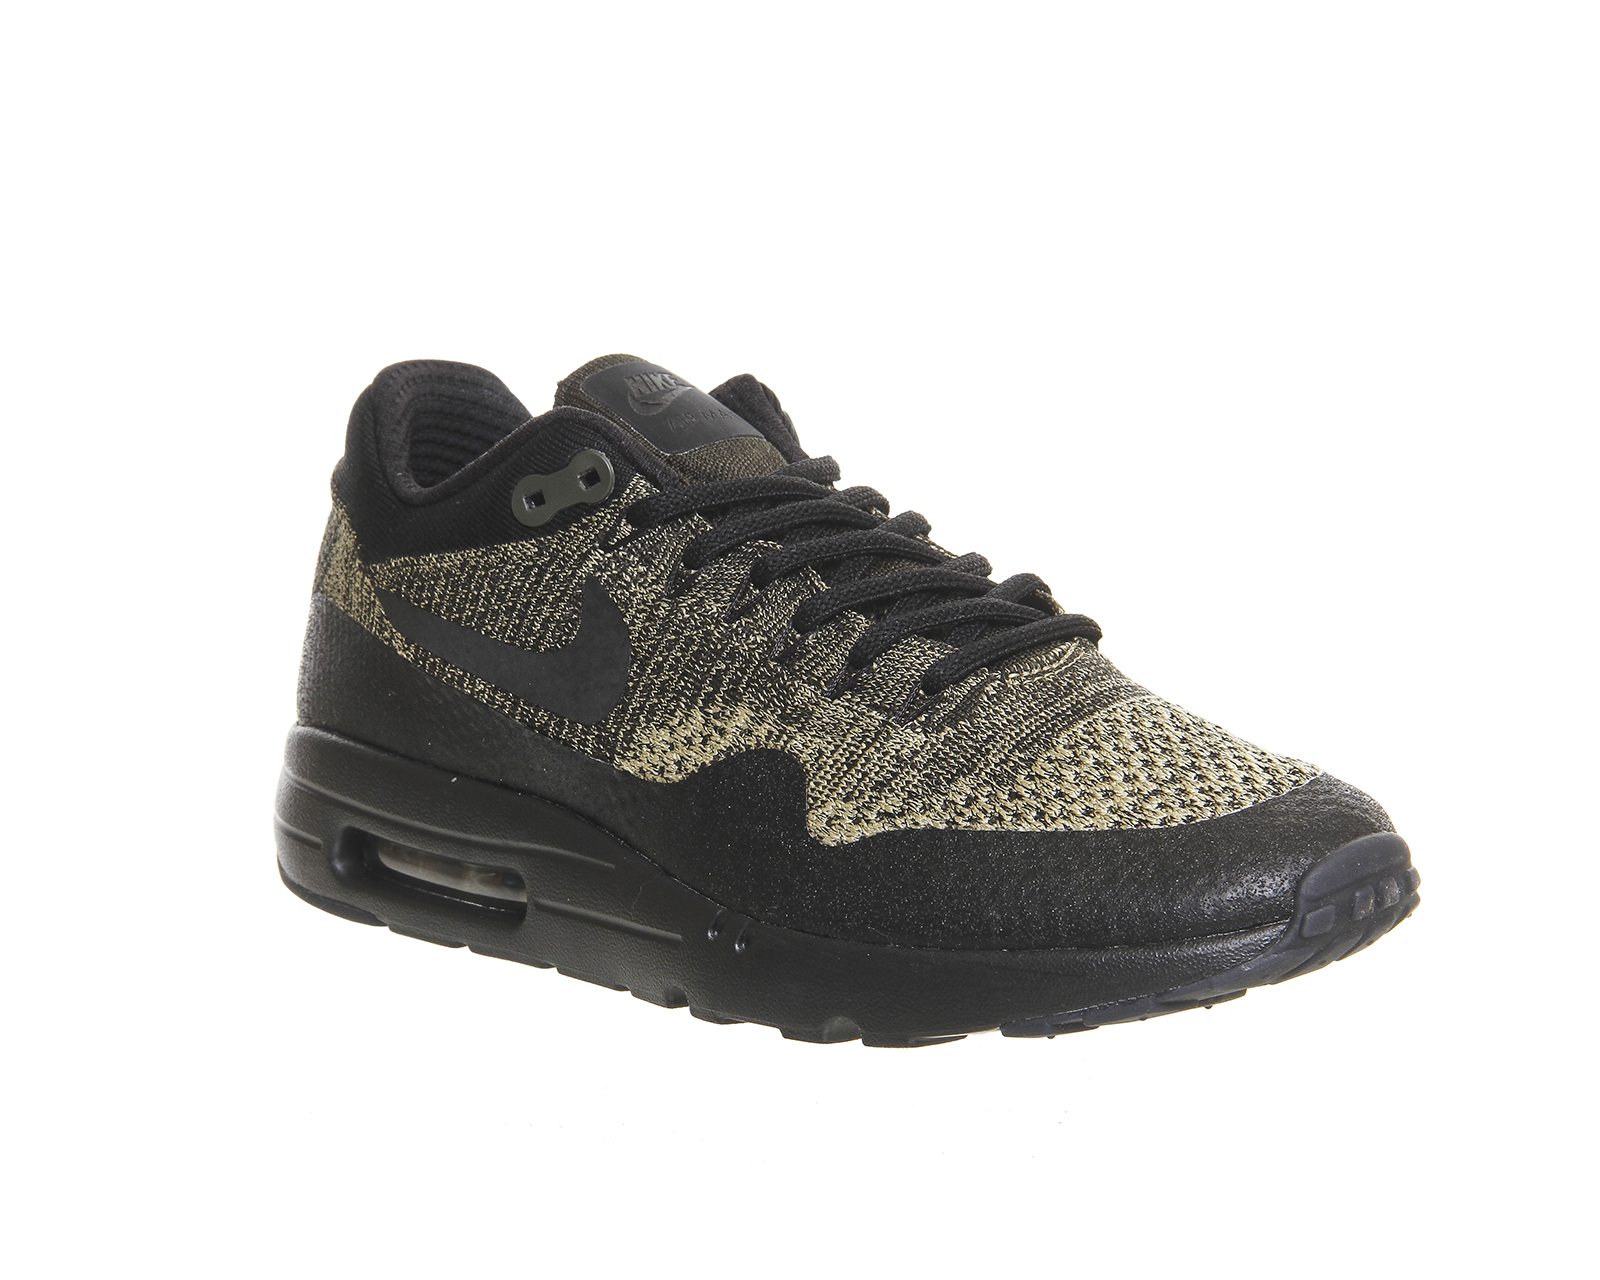 NikeAir Max 1 Flyknit MNeutral Olive Black Sequoia